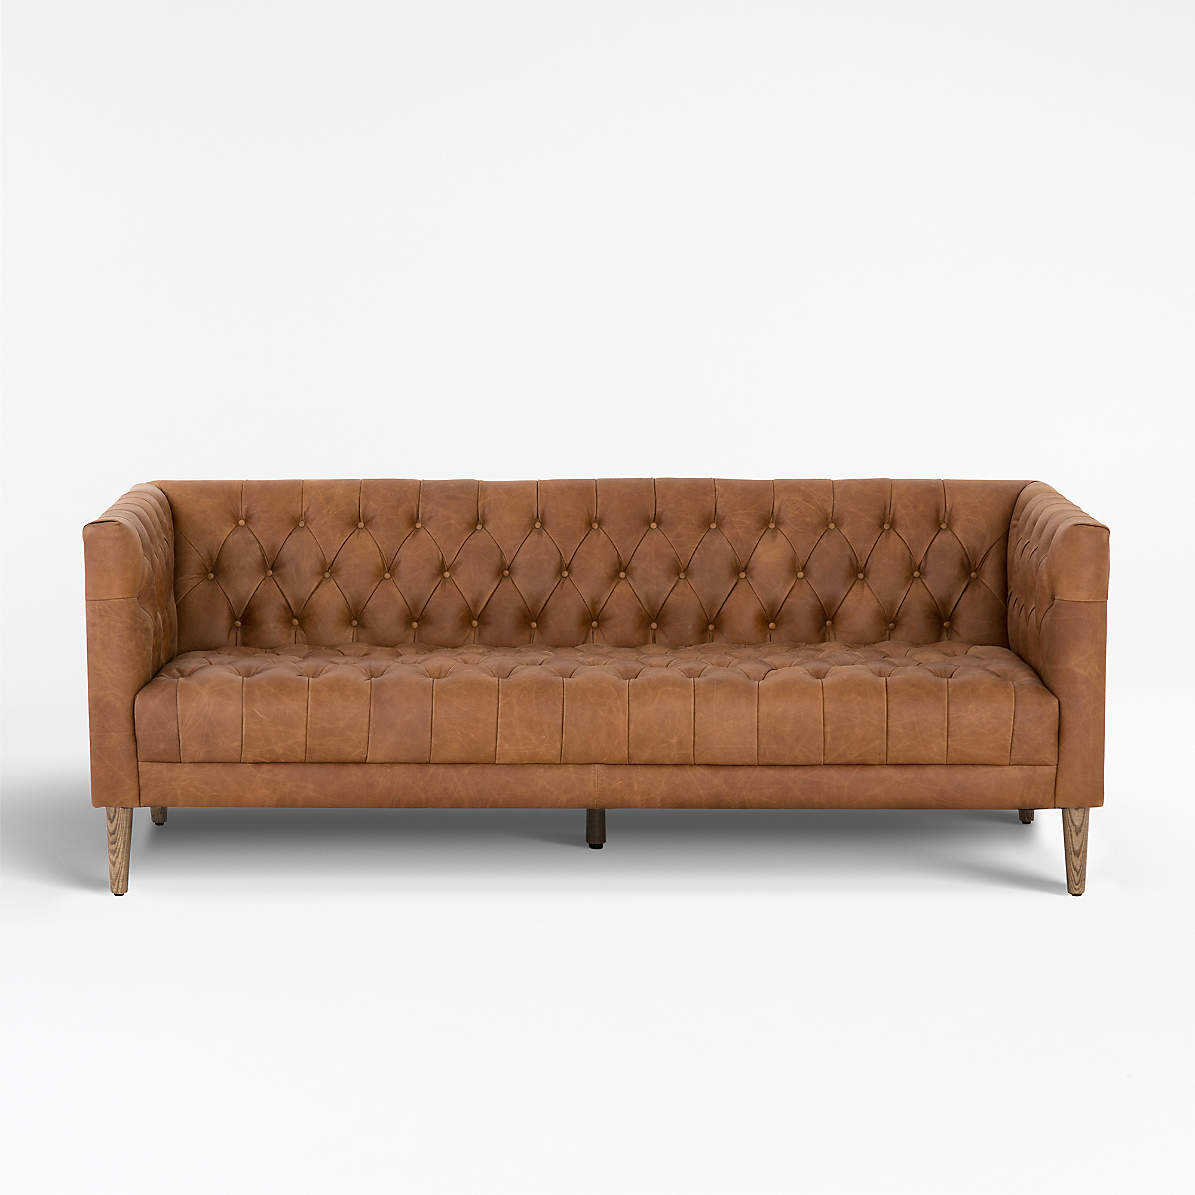 Rollins Natural Washed Camel Leather, Long Tufted Sofa